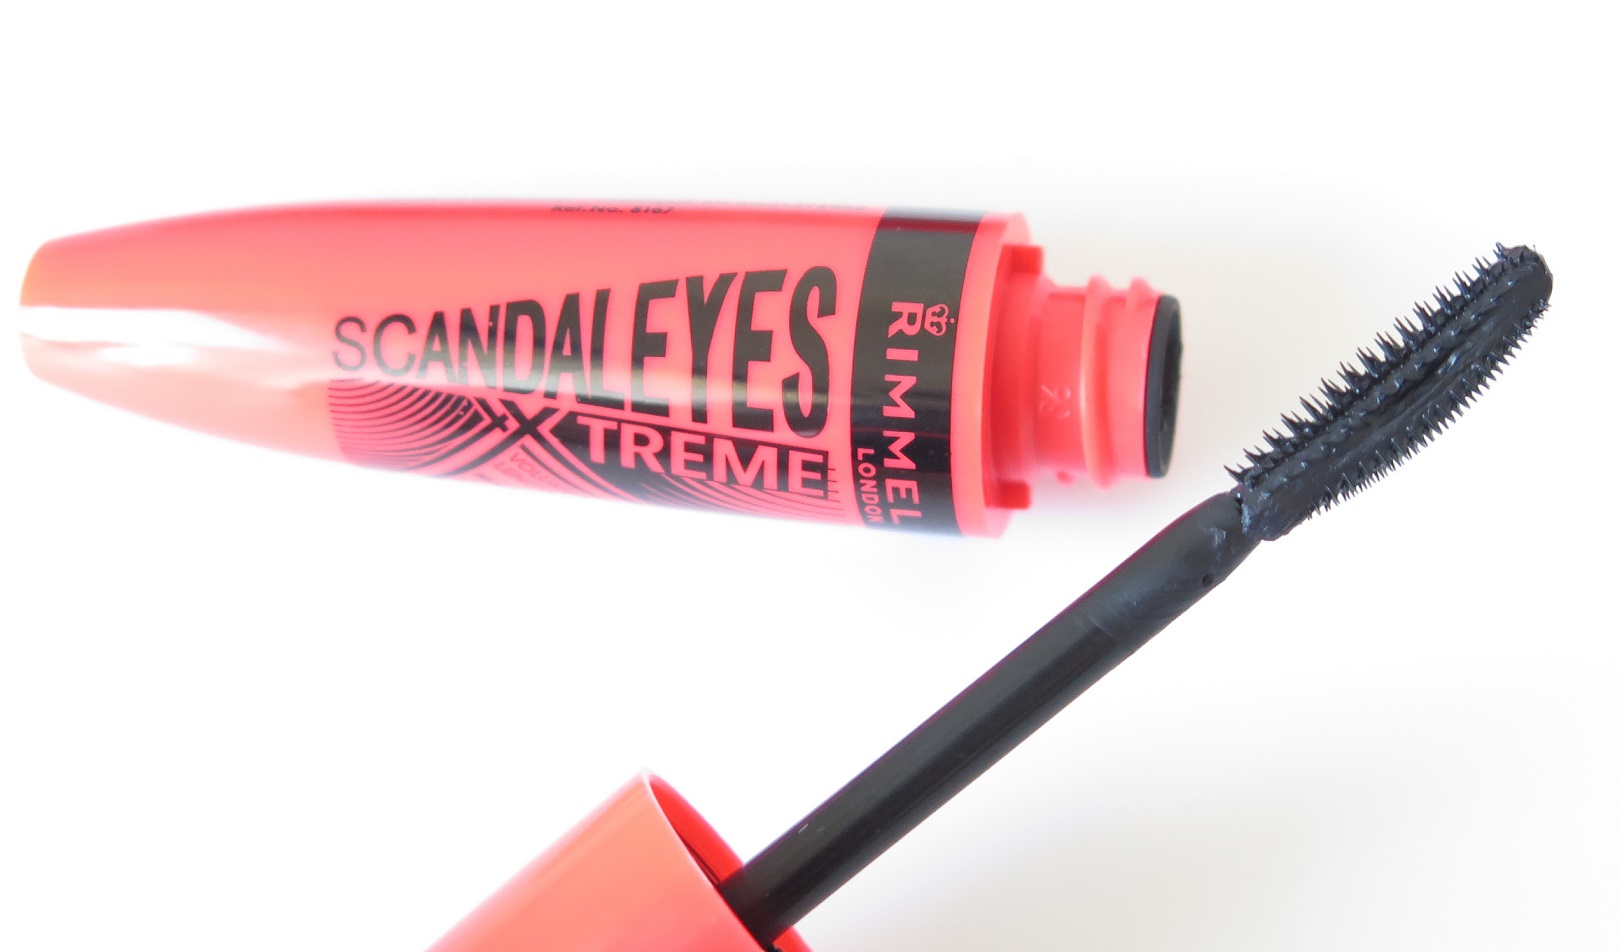 Rimmel London ScandalEyes XX-Treme Volume & Length Mascara Review | Tried and Tested Blog